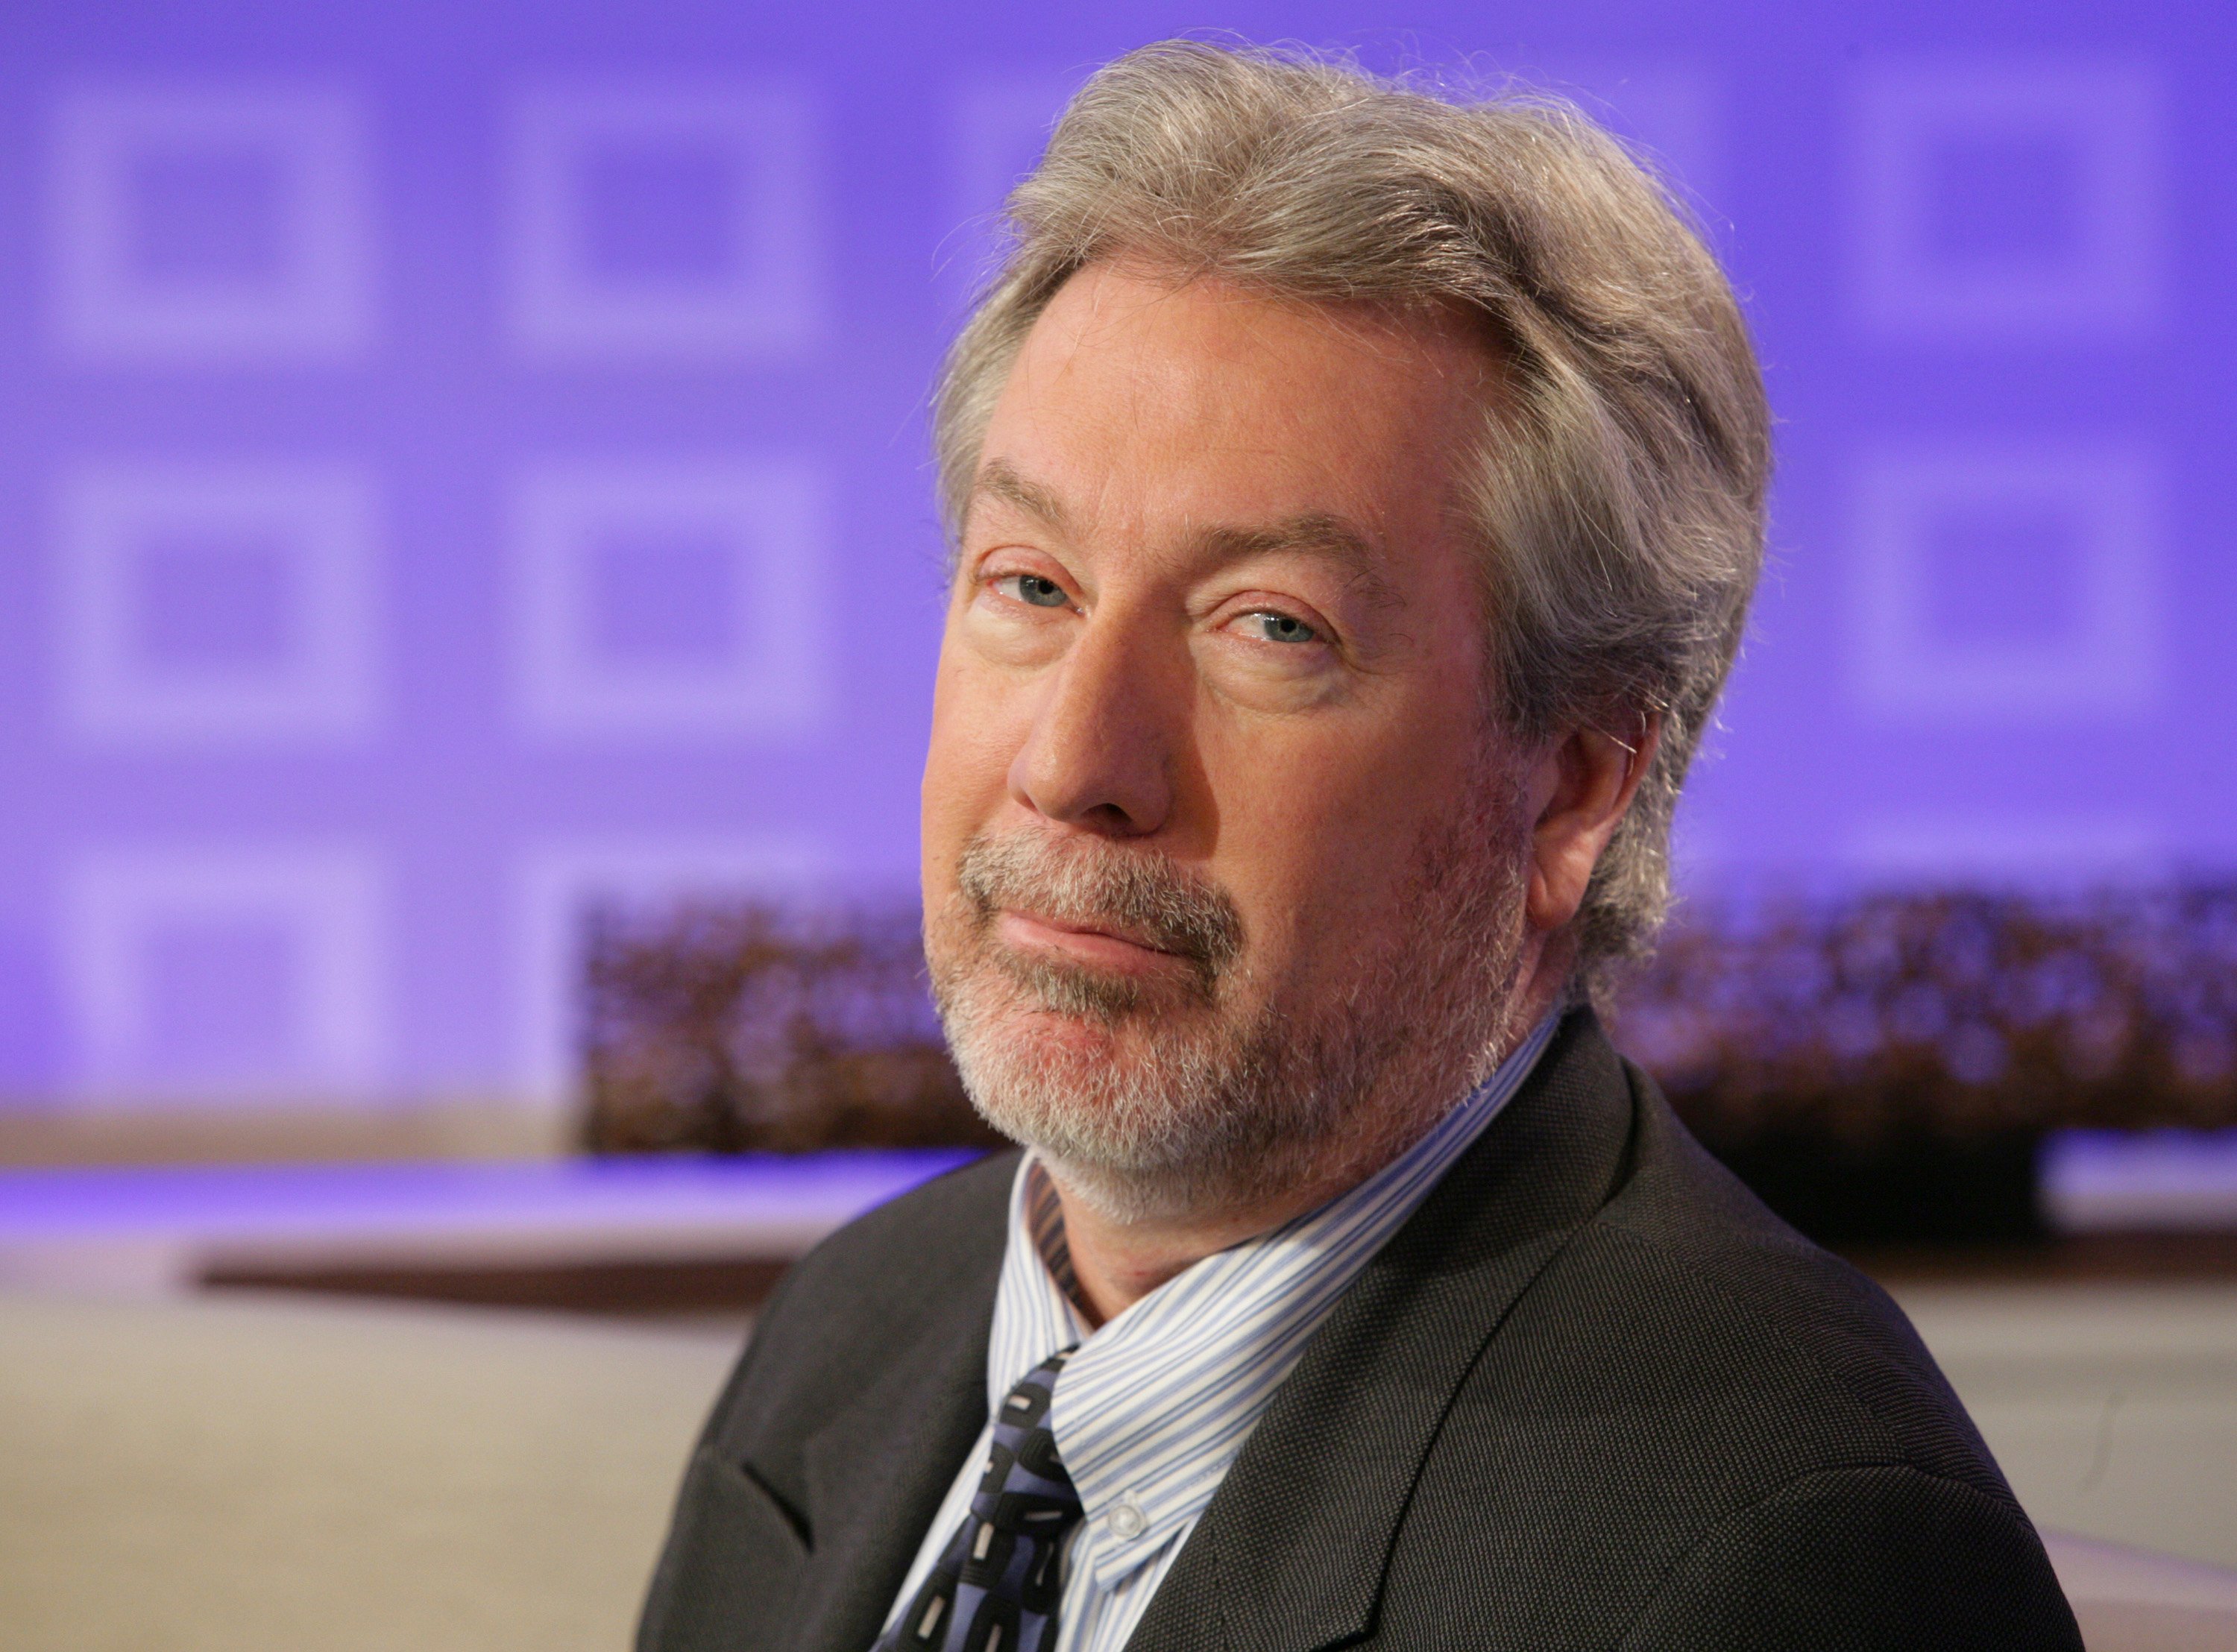 Drew Peterson during an appearance on the Today show in 2008